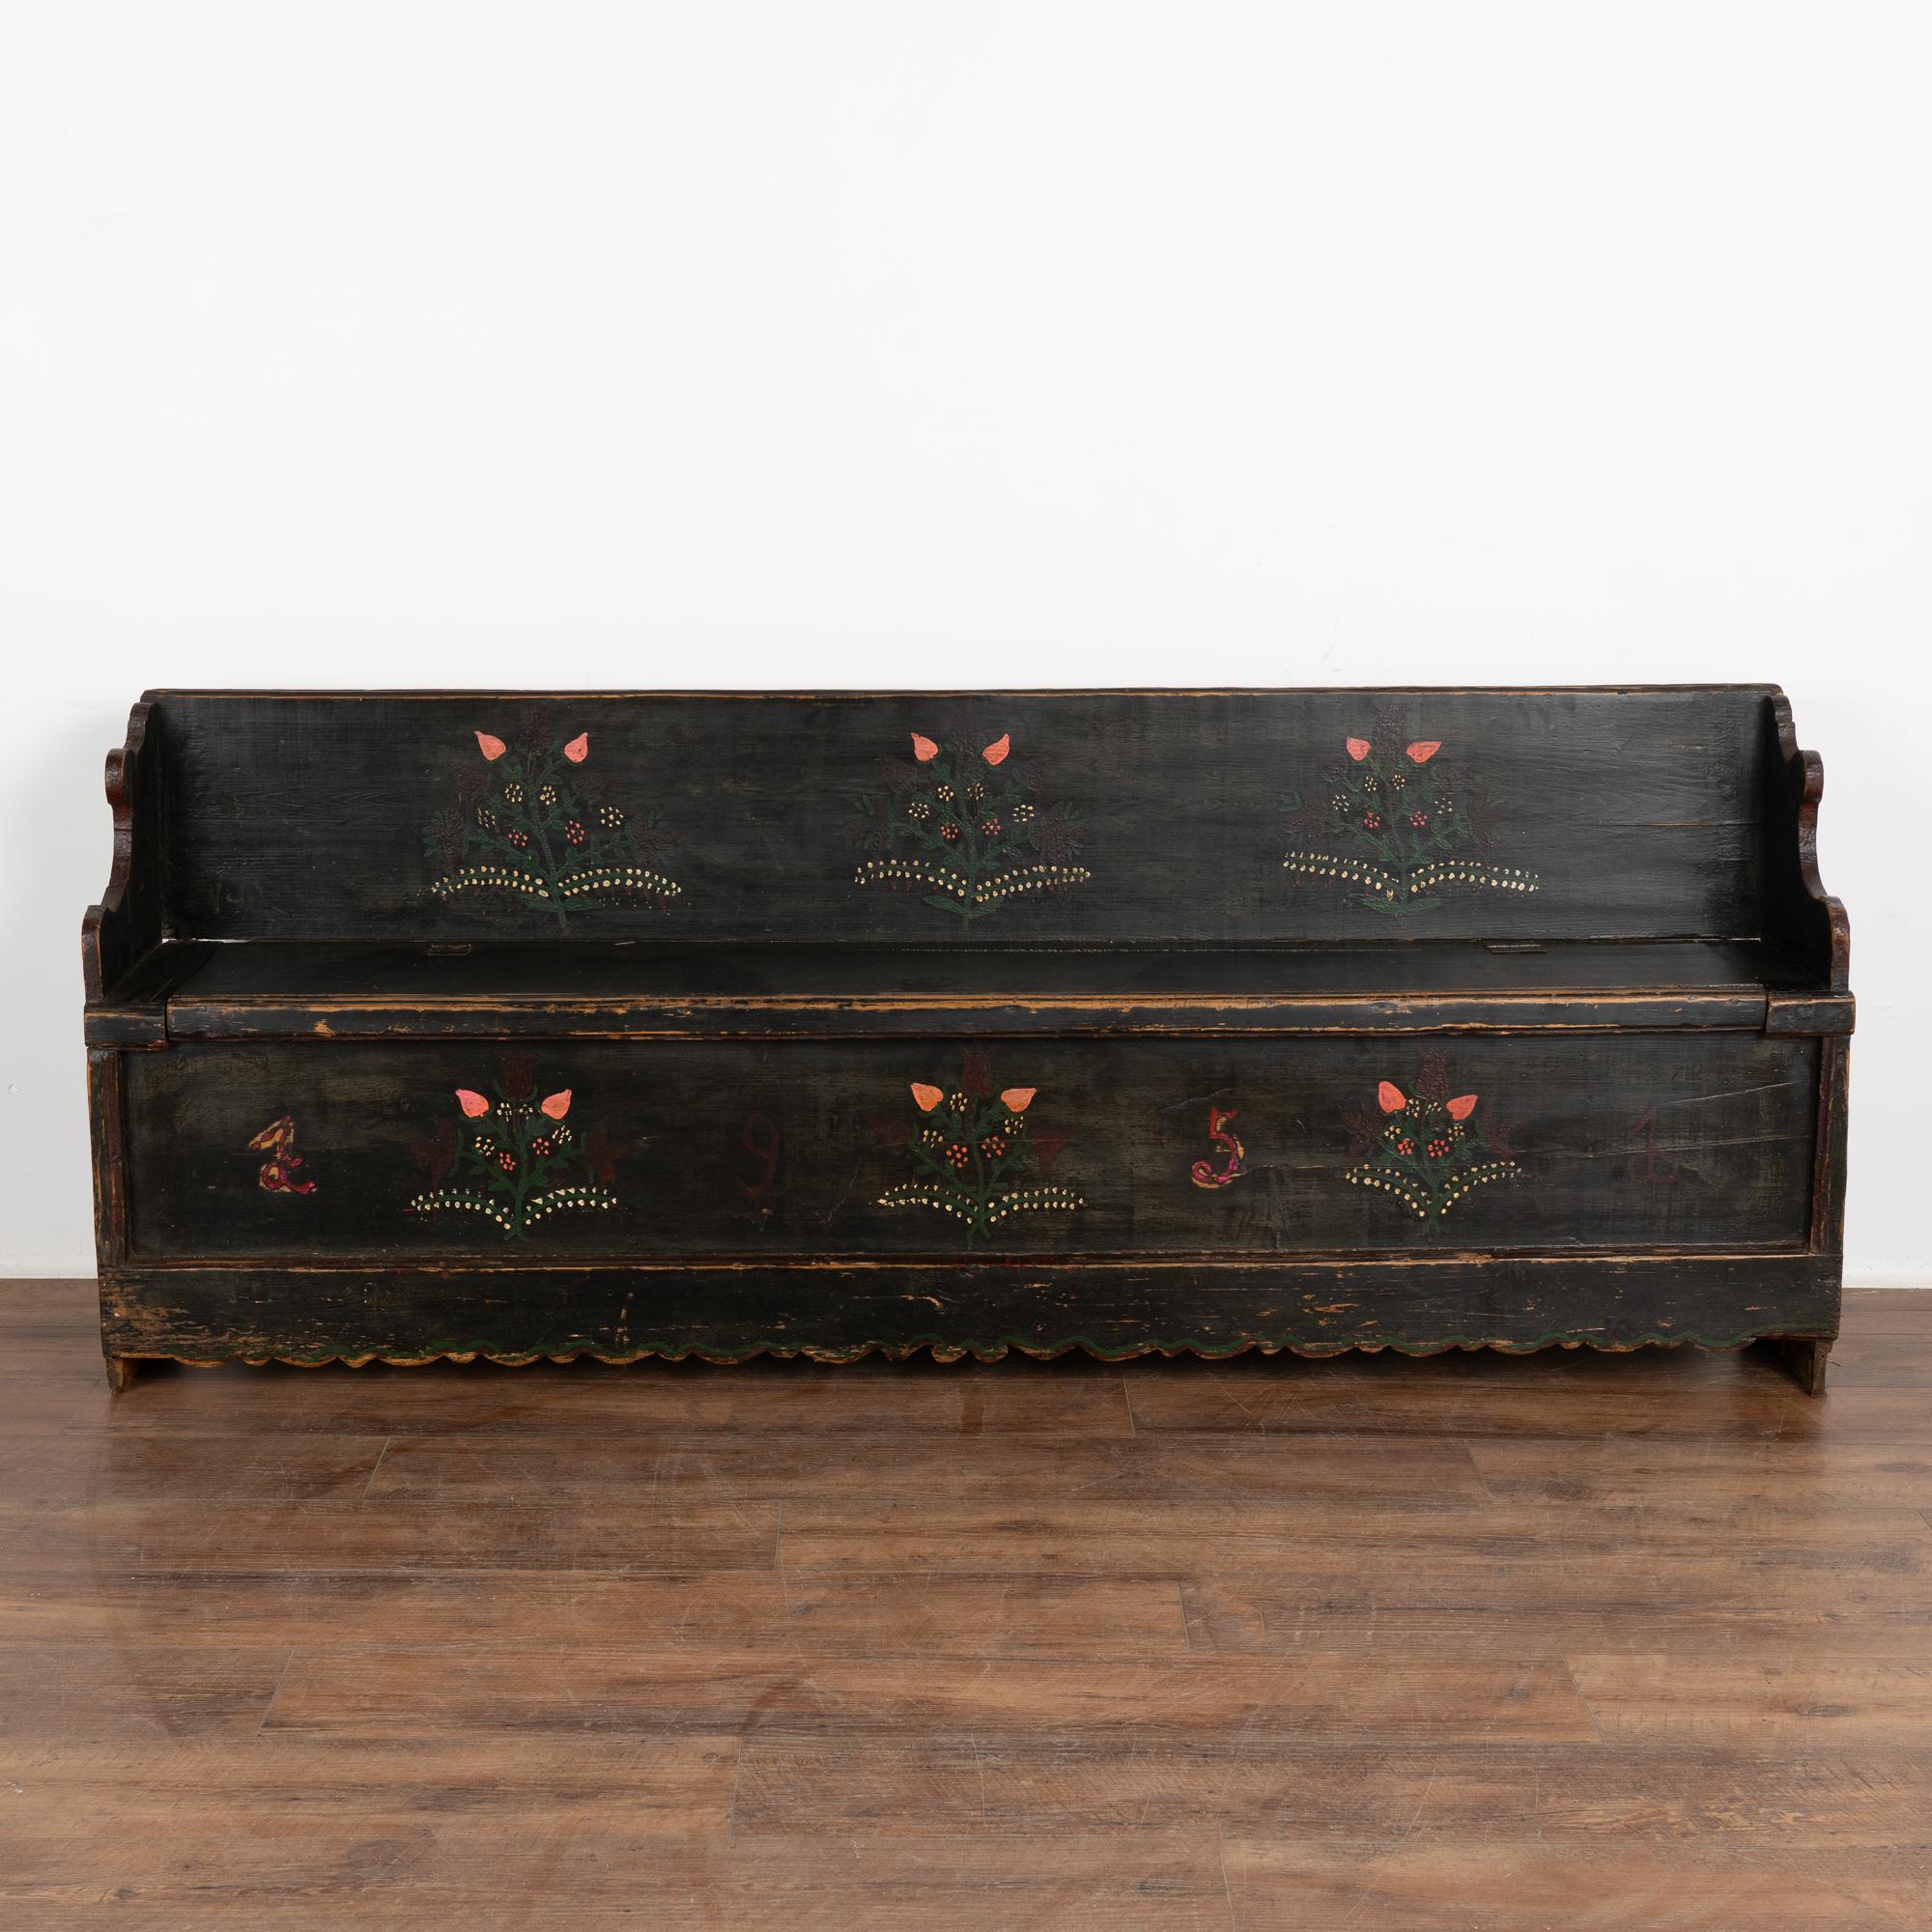 Folk Art Original Black Painted Narrow Pine Bench With Storage, Hungary dated 1951 For Sale